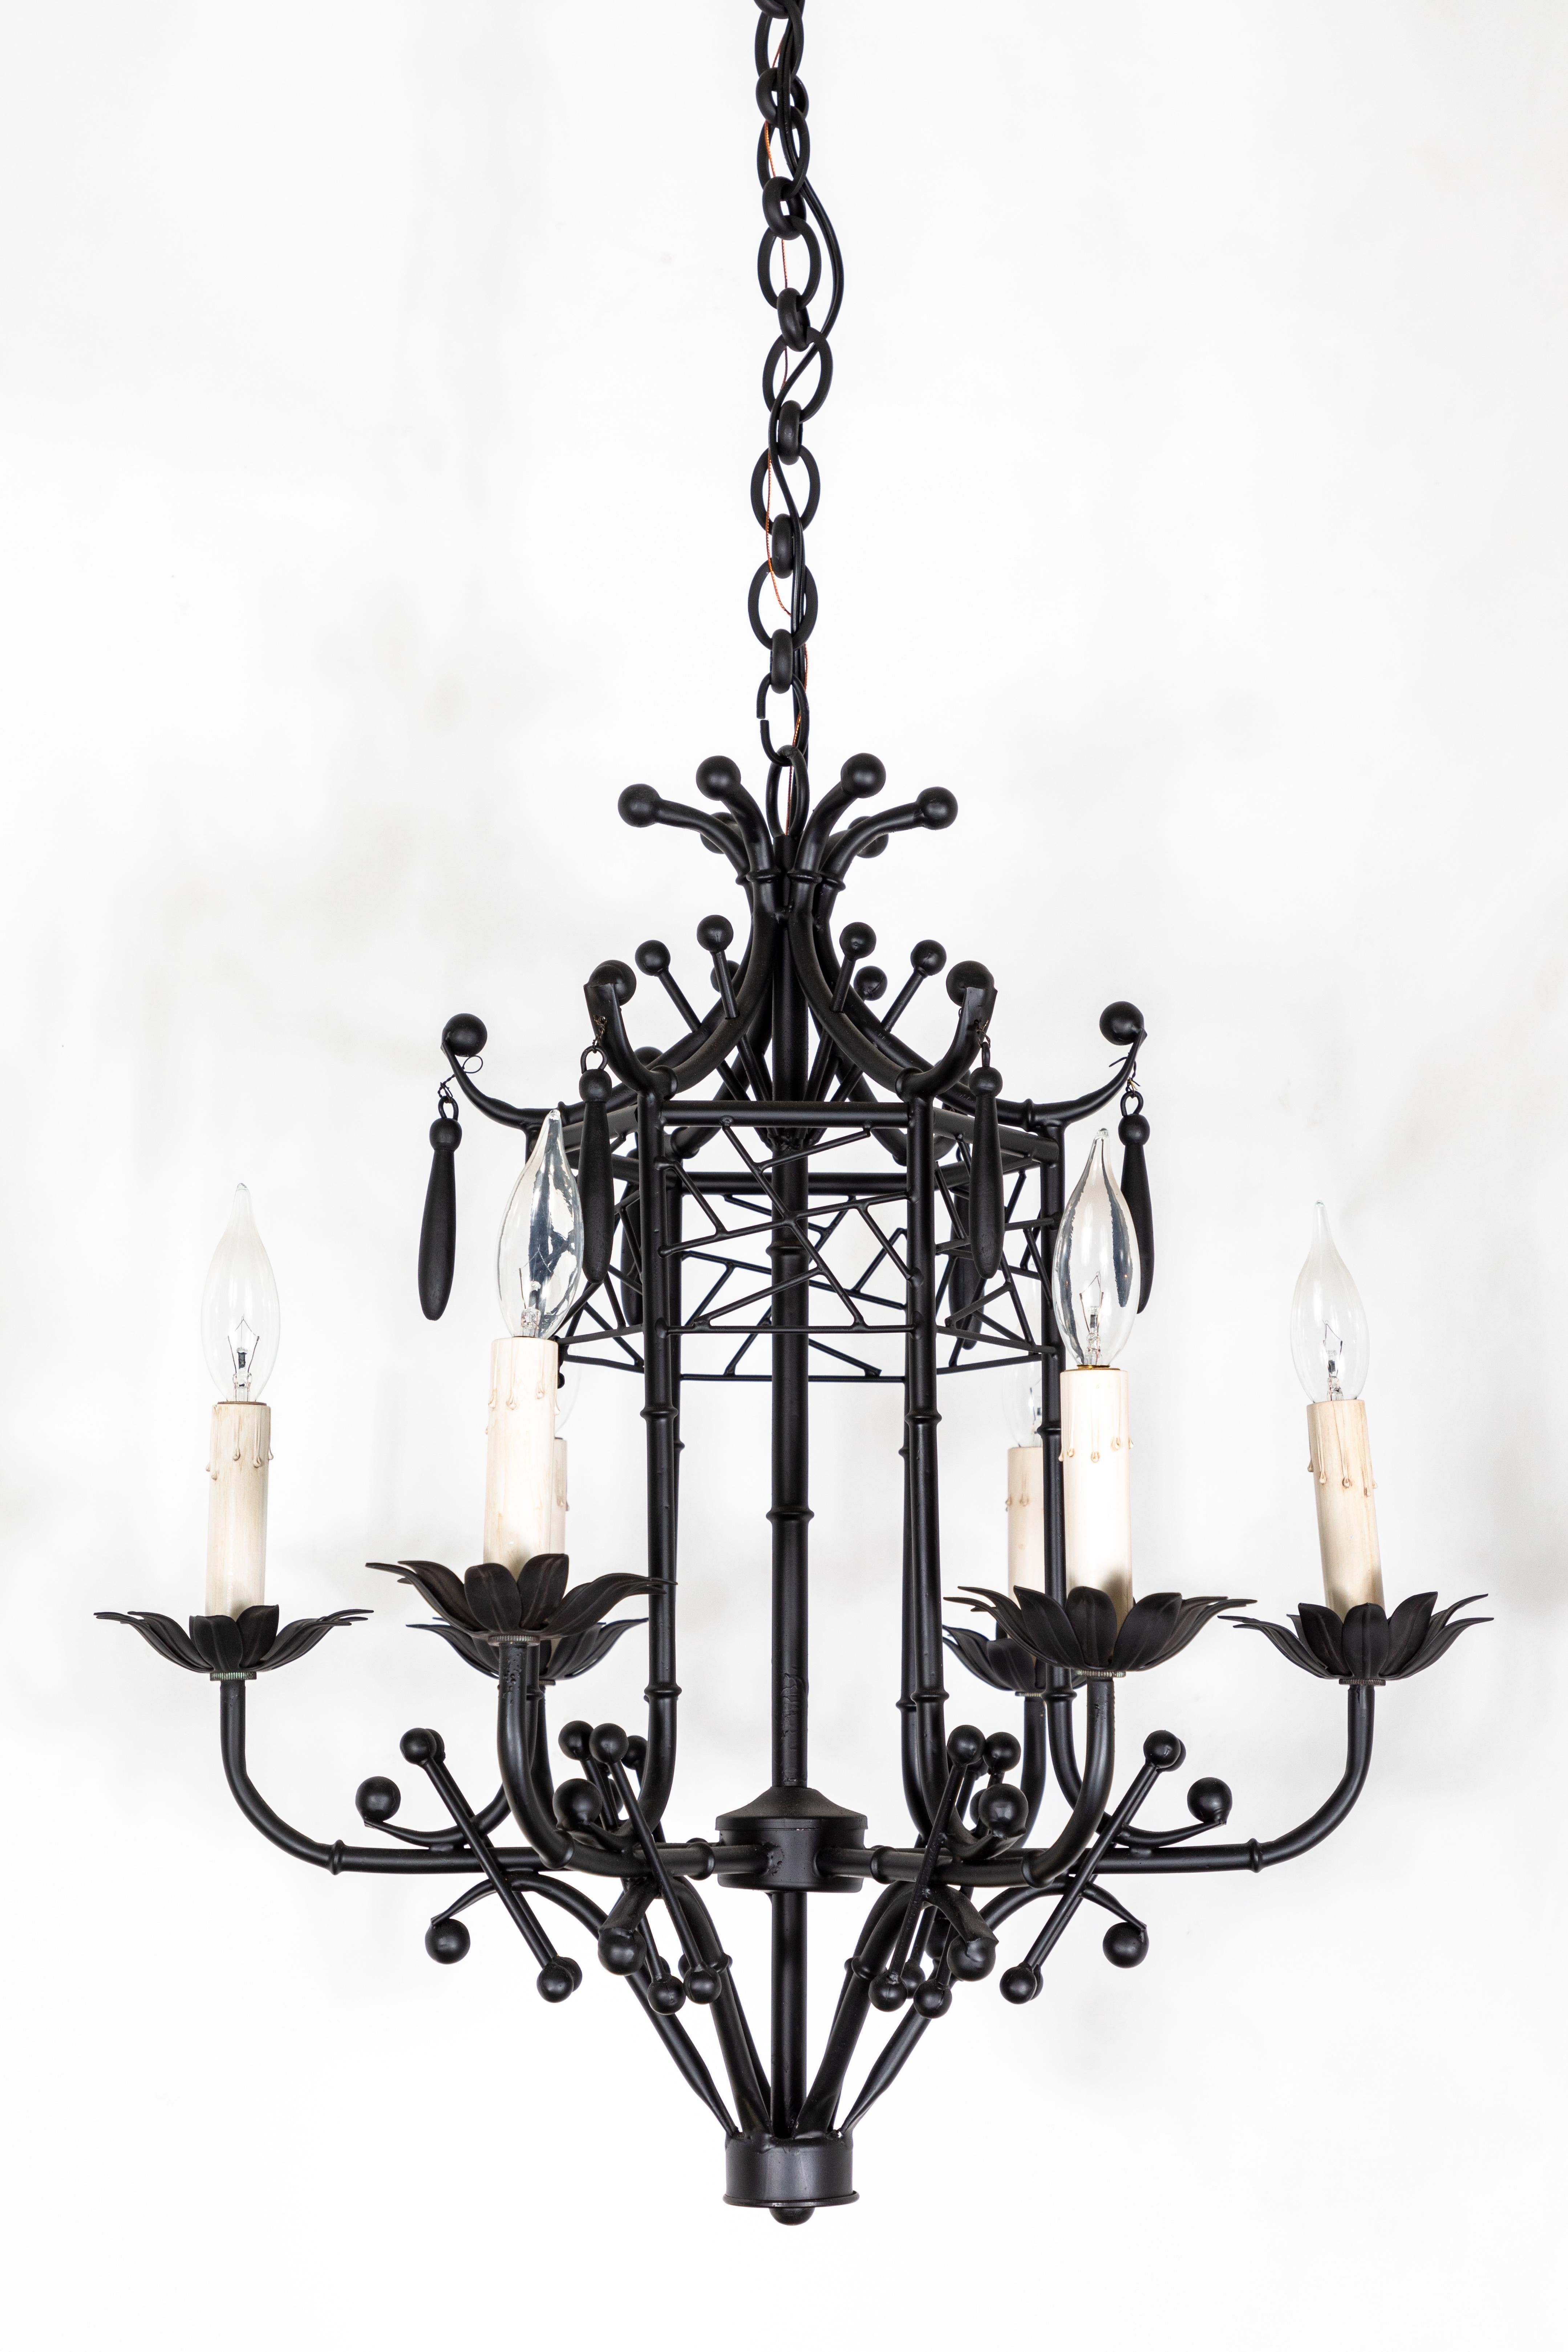 Powder-Coated Vintage Chinoiserie Style 6-Arm Hanging Chandelier in Faux Bamboo